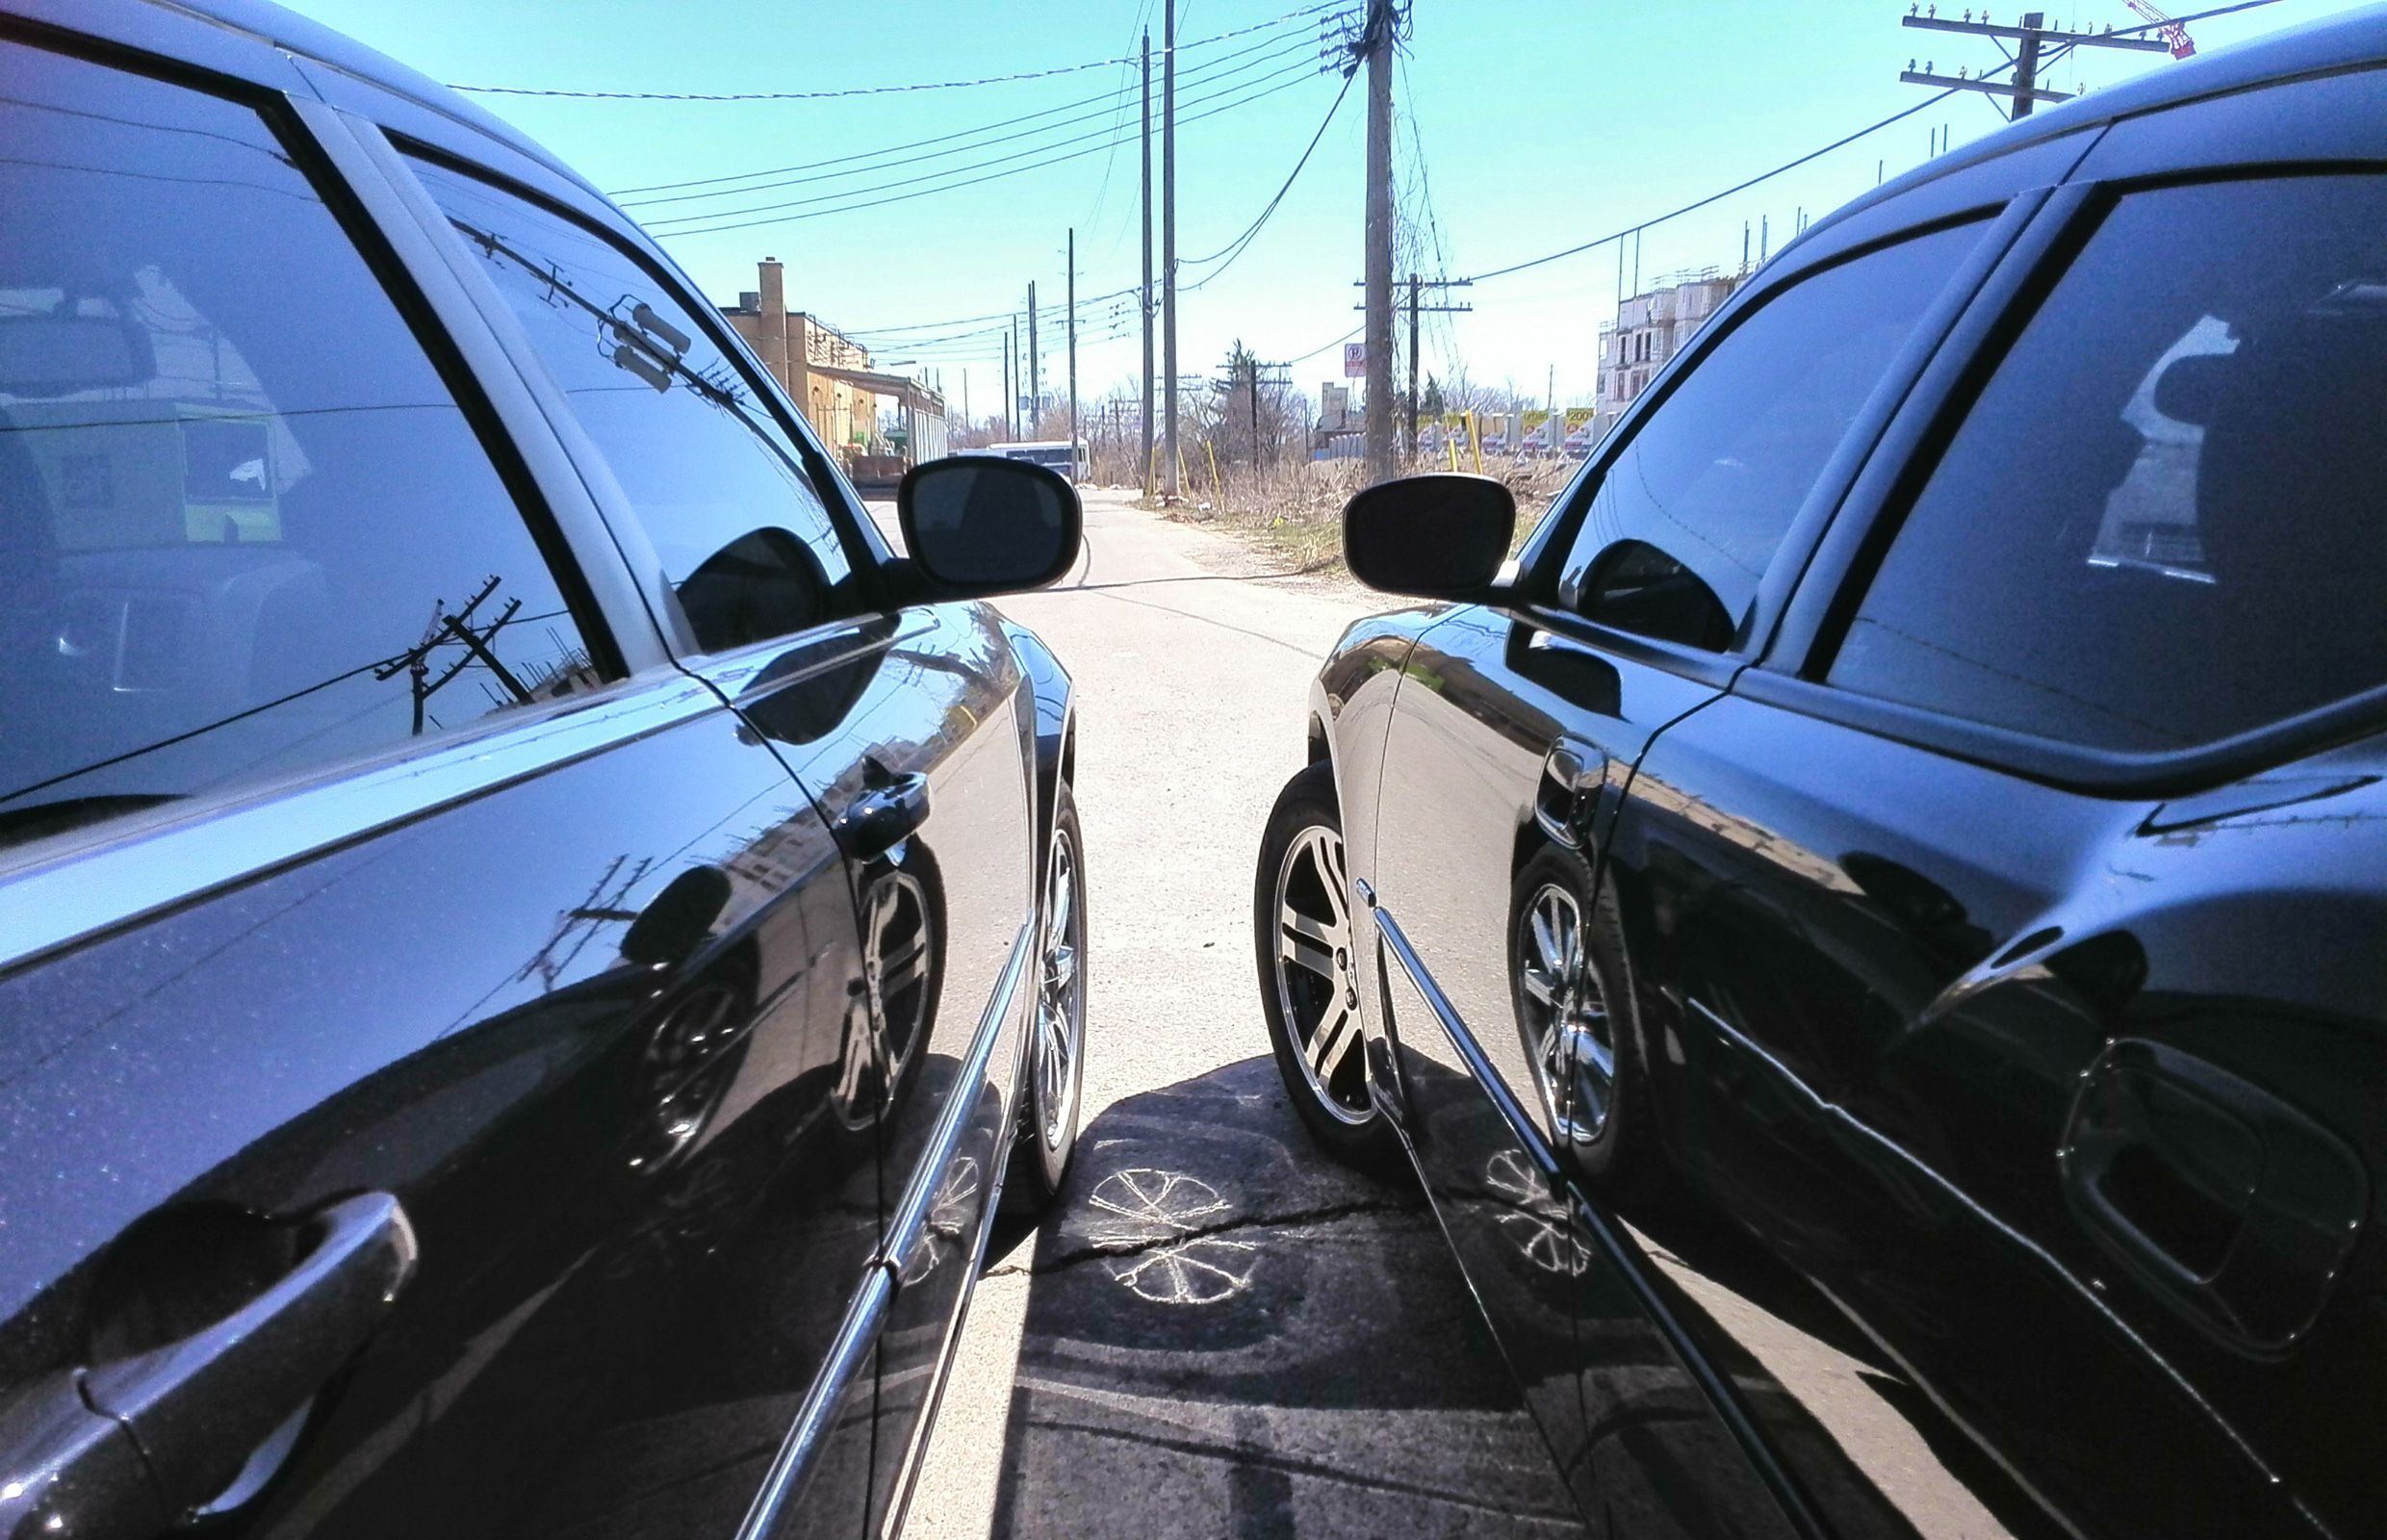 Surprising facts about the dark side of tinted windows